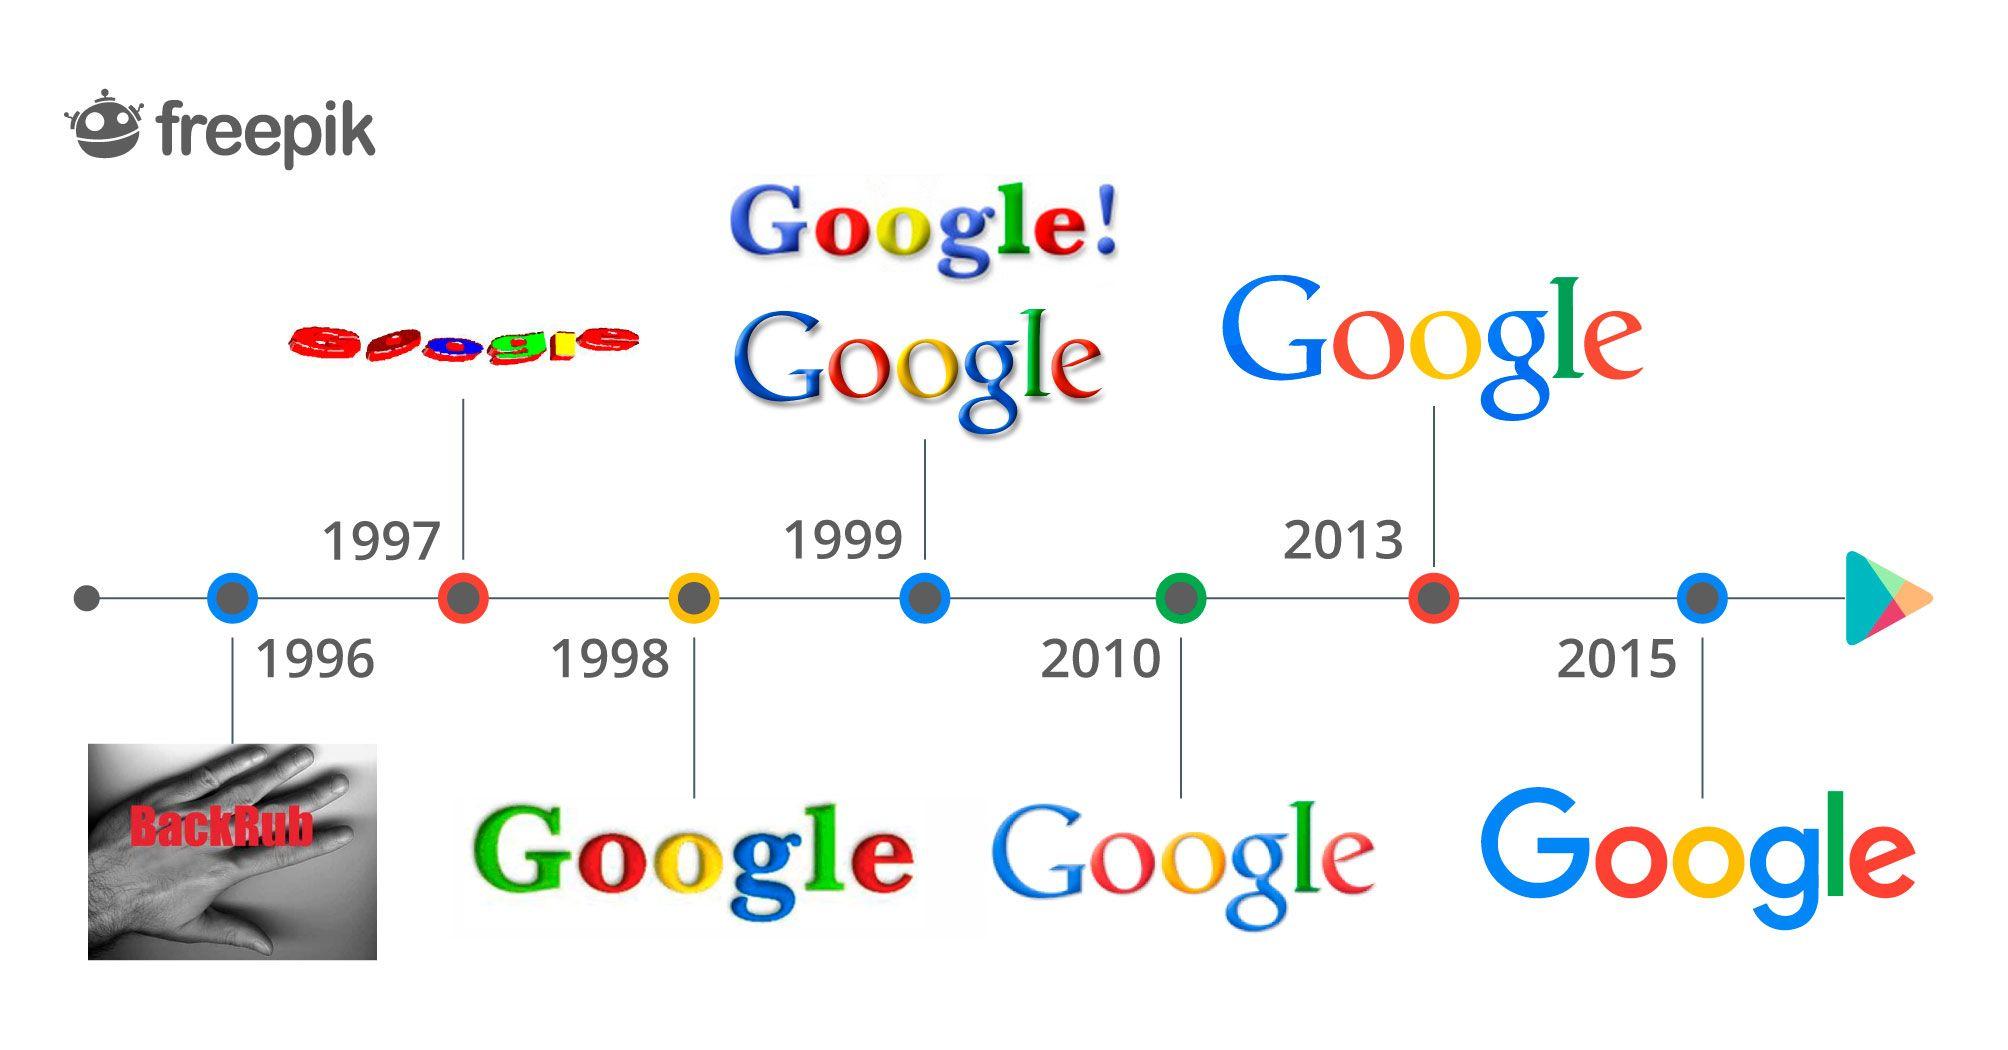 New Google Play Logo - The evolution of Google logo as well as its Play Store logo ...